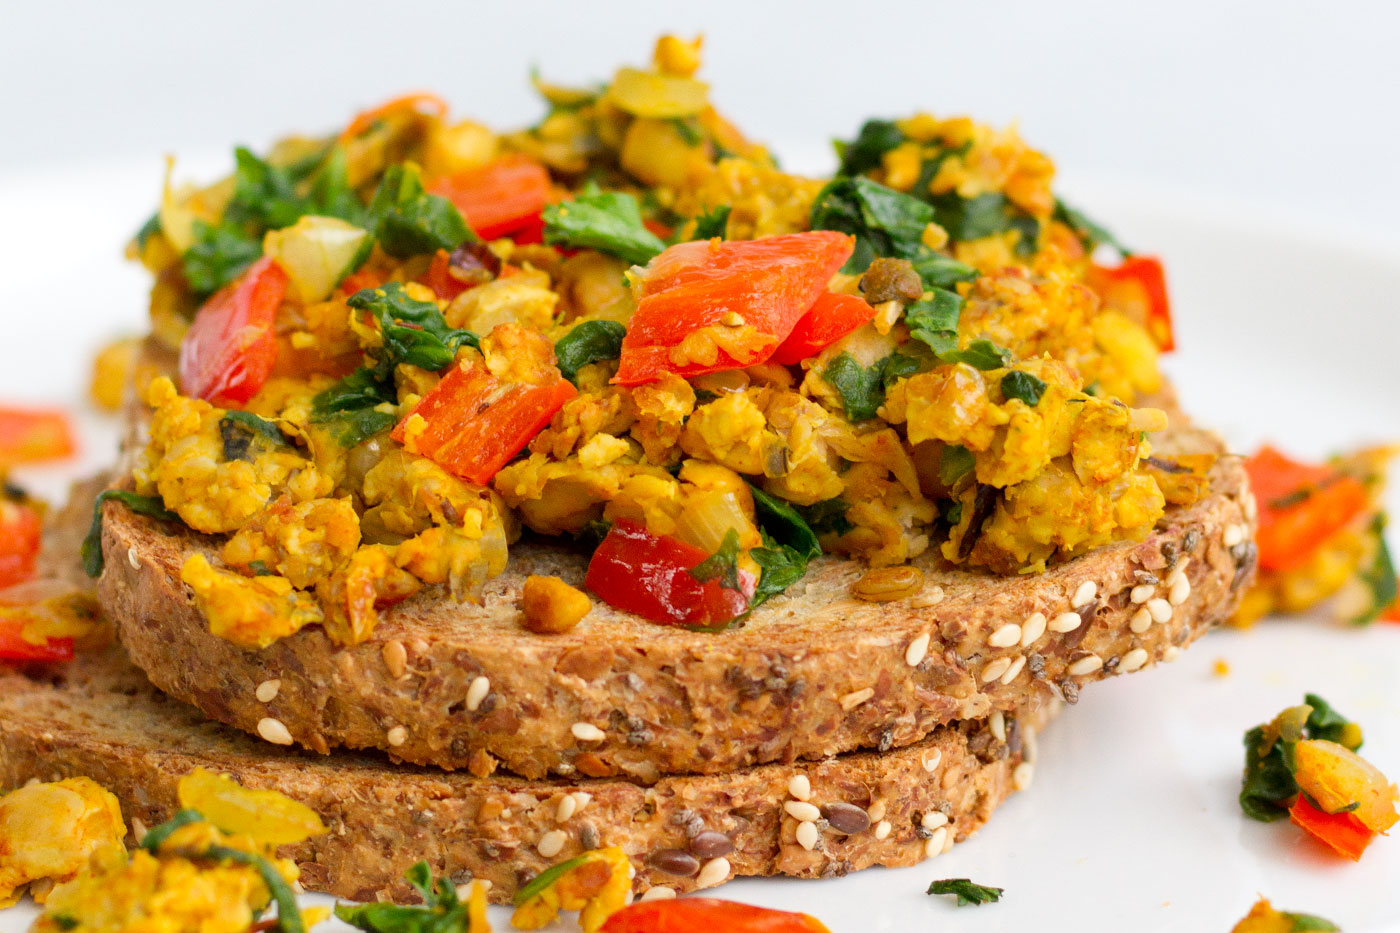 A simple lunch Smoky tempeh scramble recipe for vegetarian